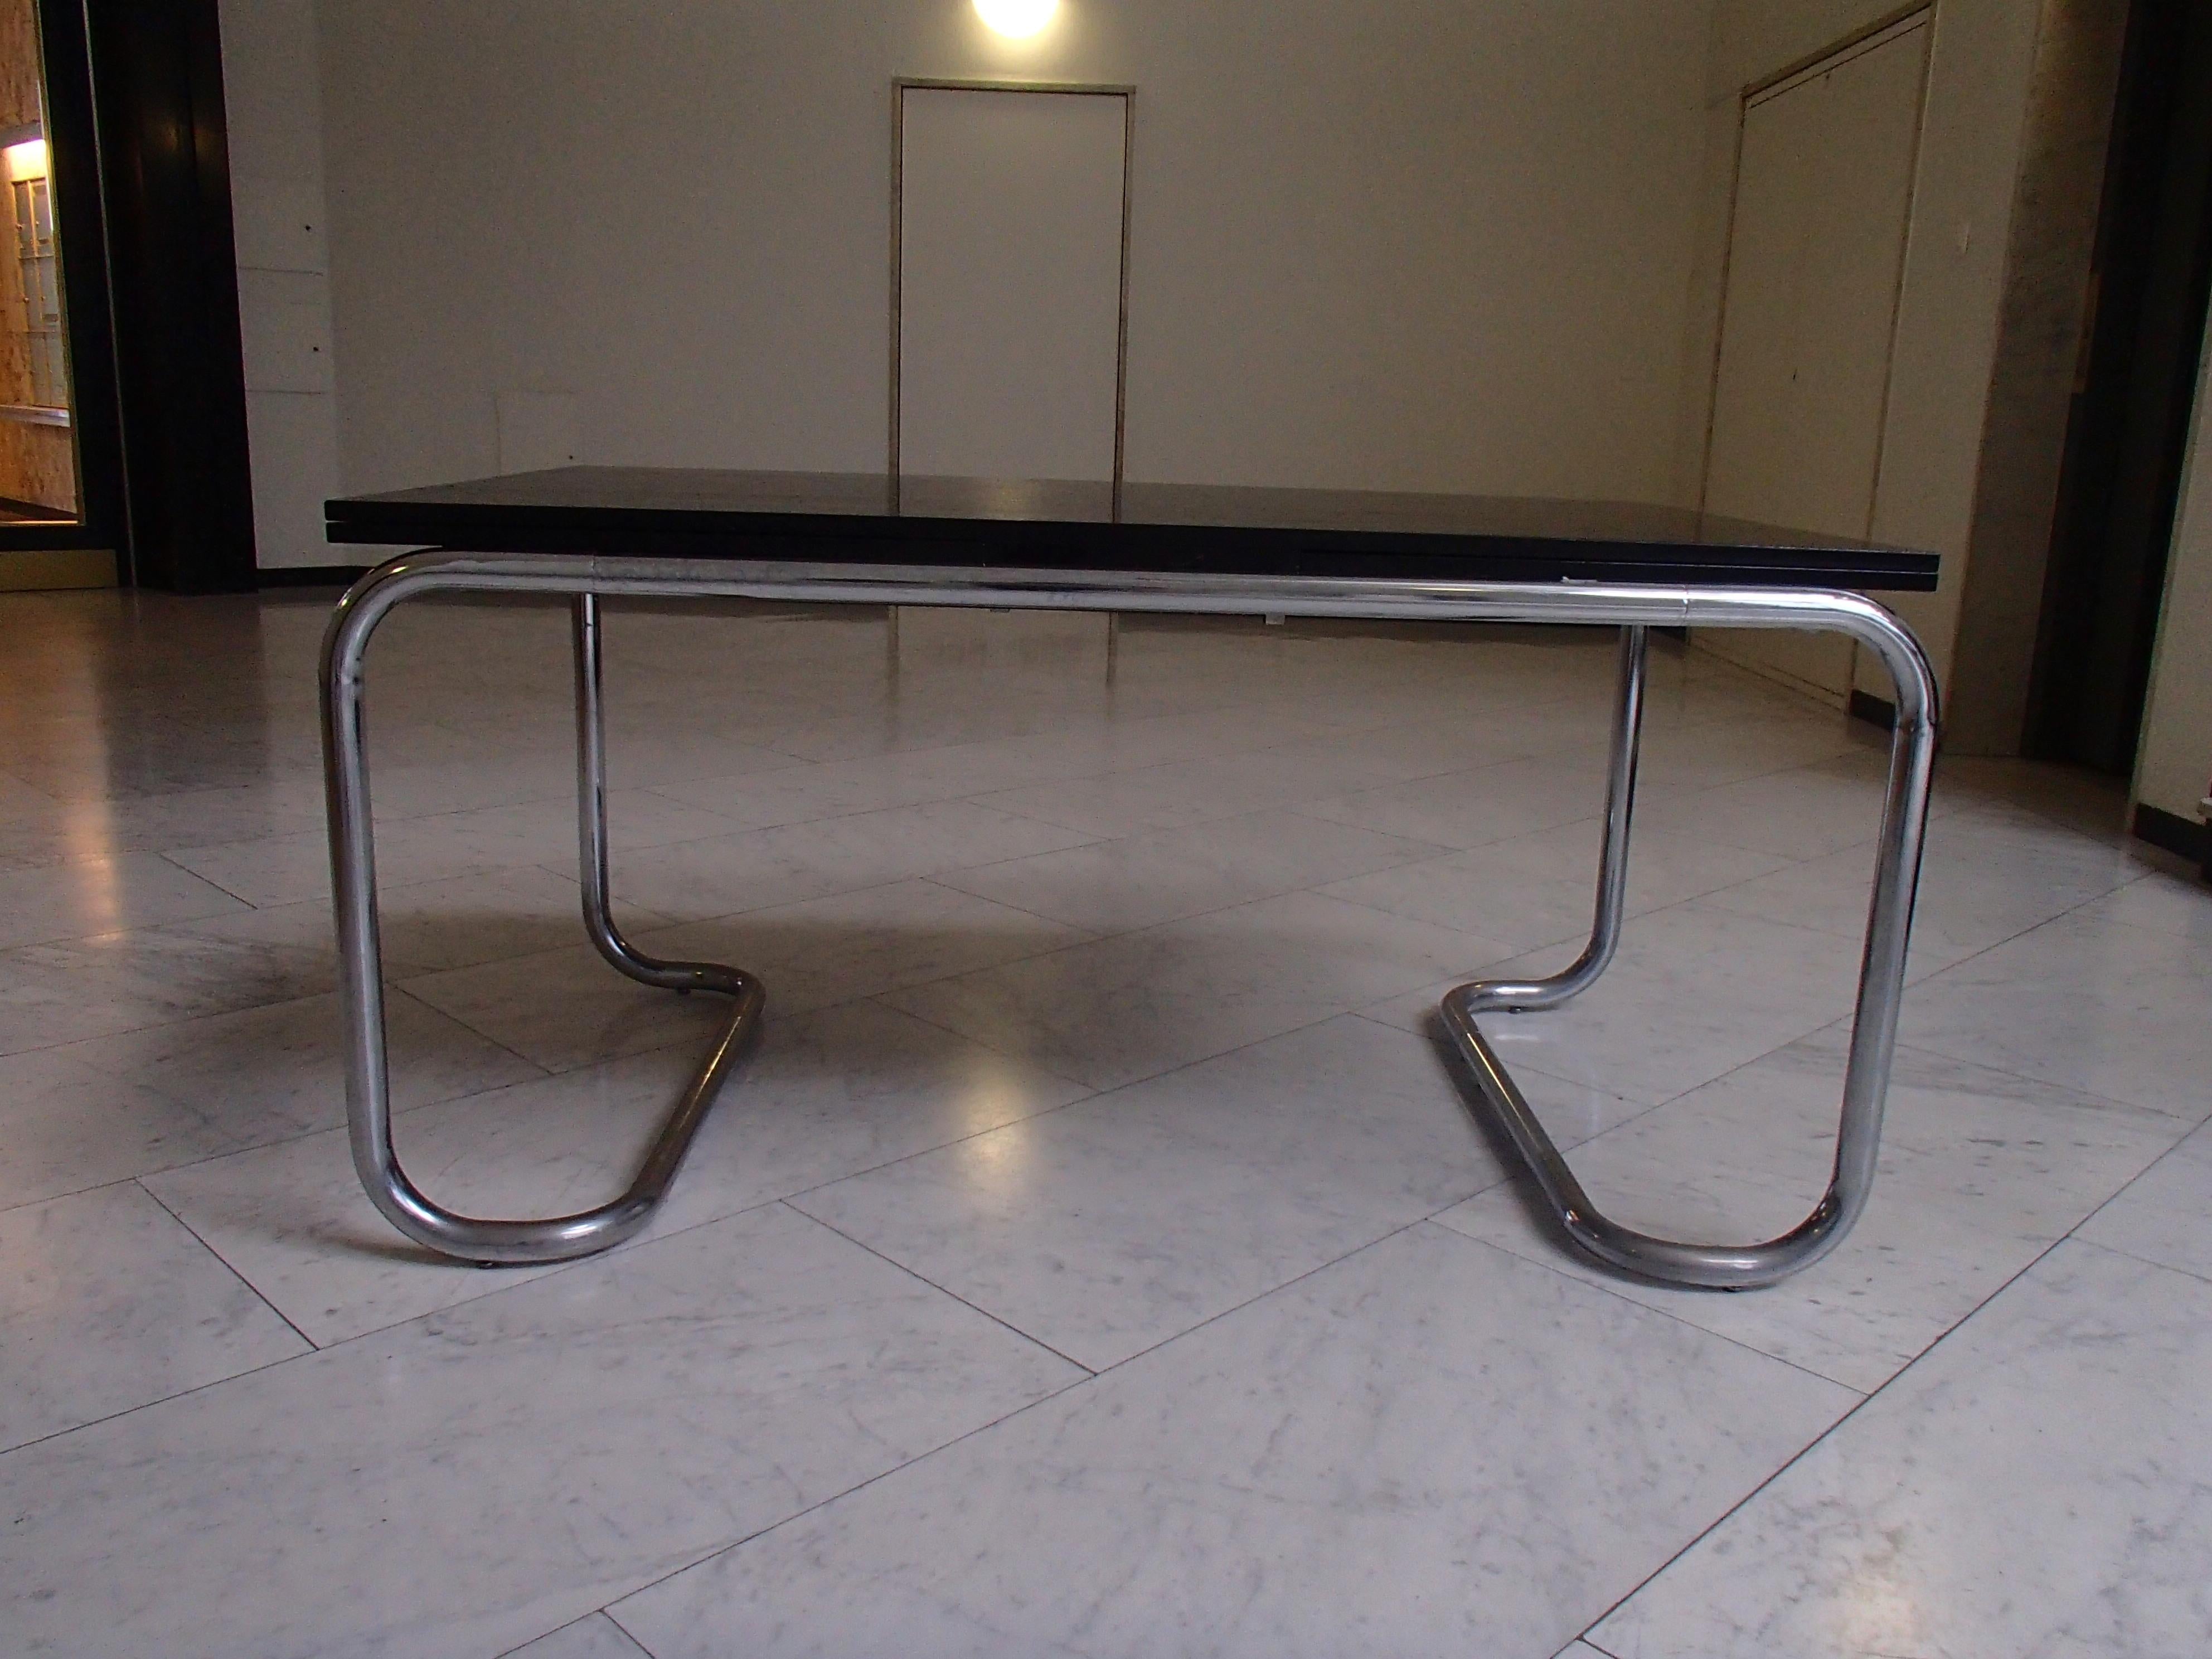 Modern chrome and black oak adjustable dining table or writing desk

Size: 90 x 150 + 2 x 60 = 90 x 270 cm.